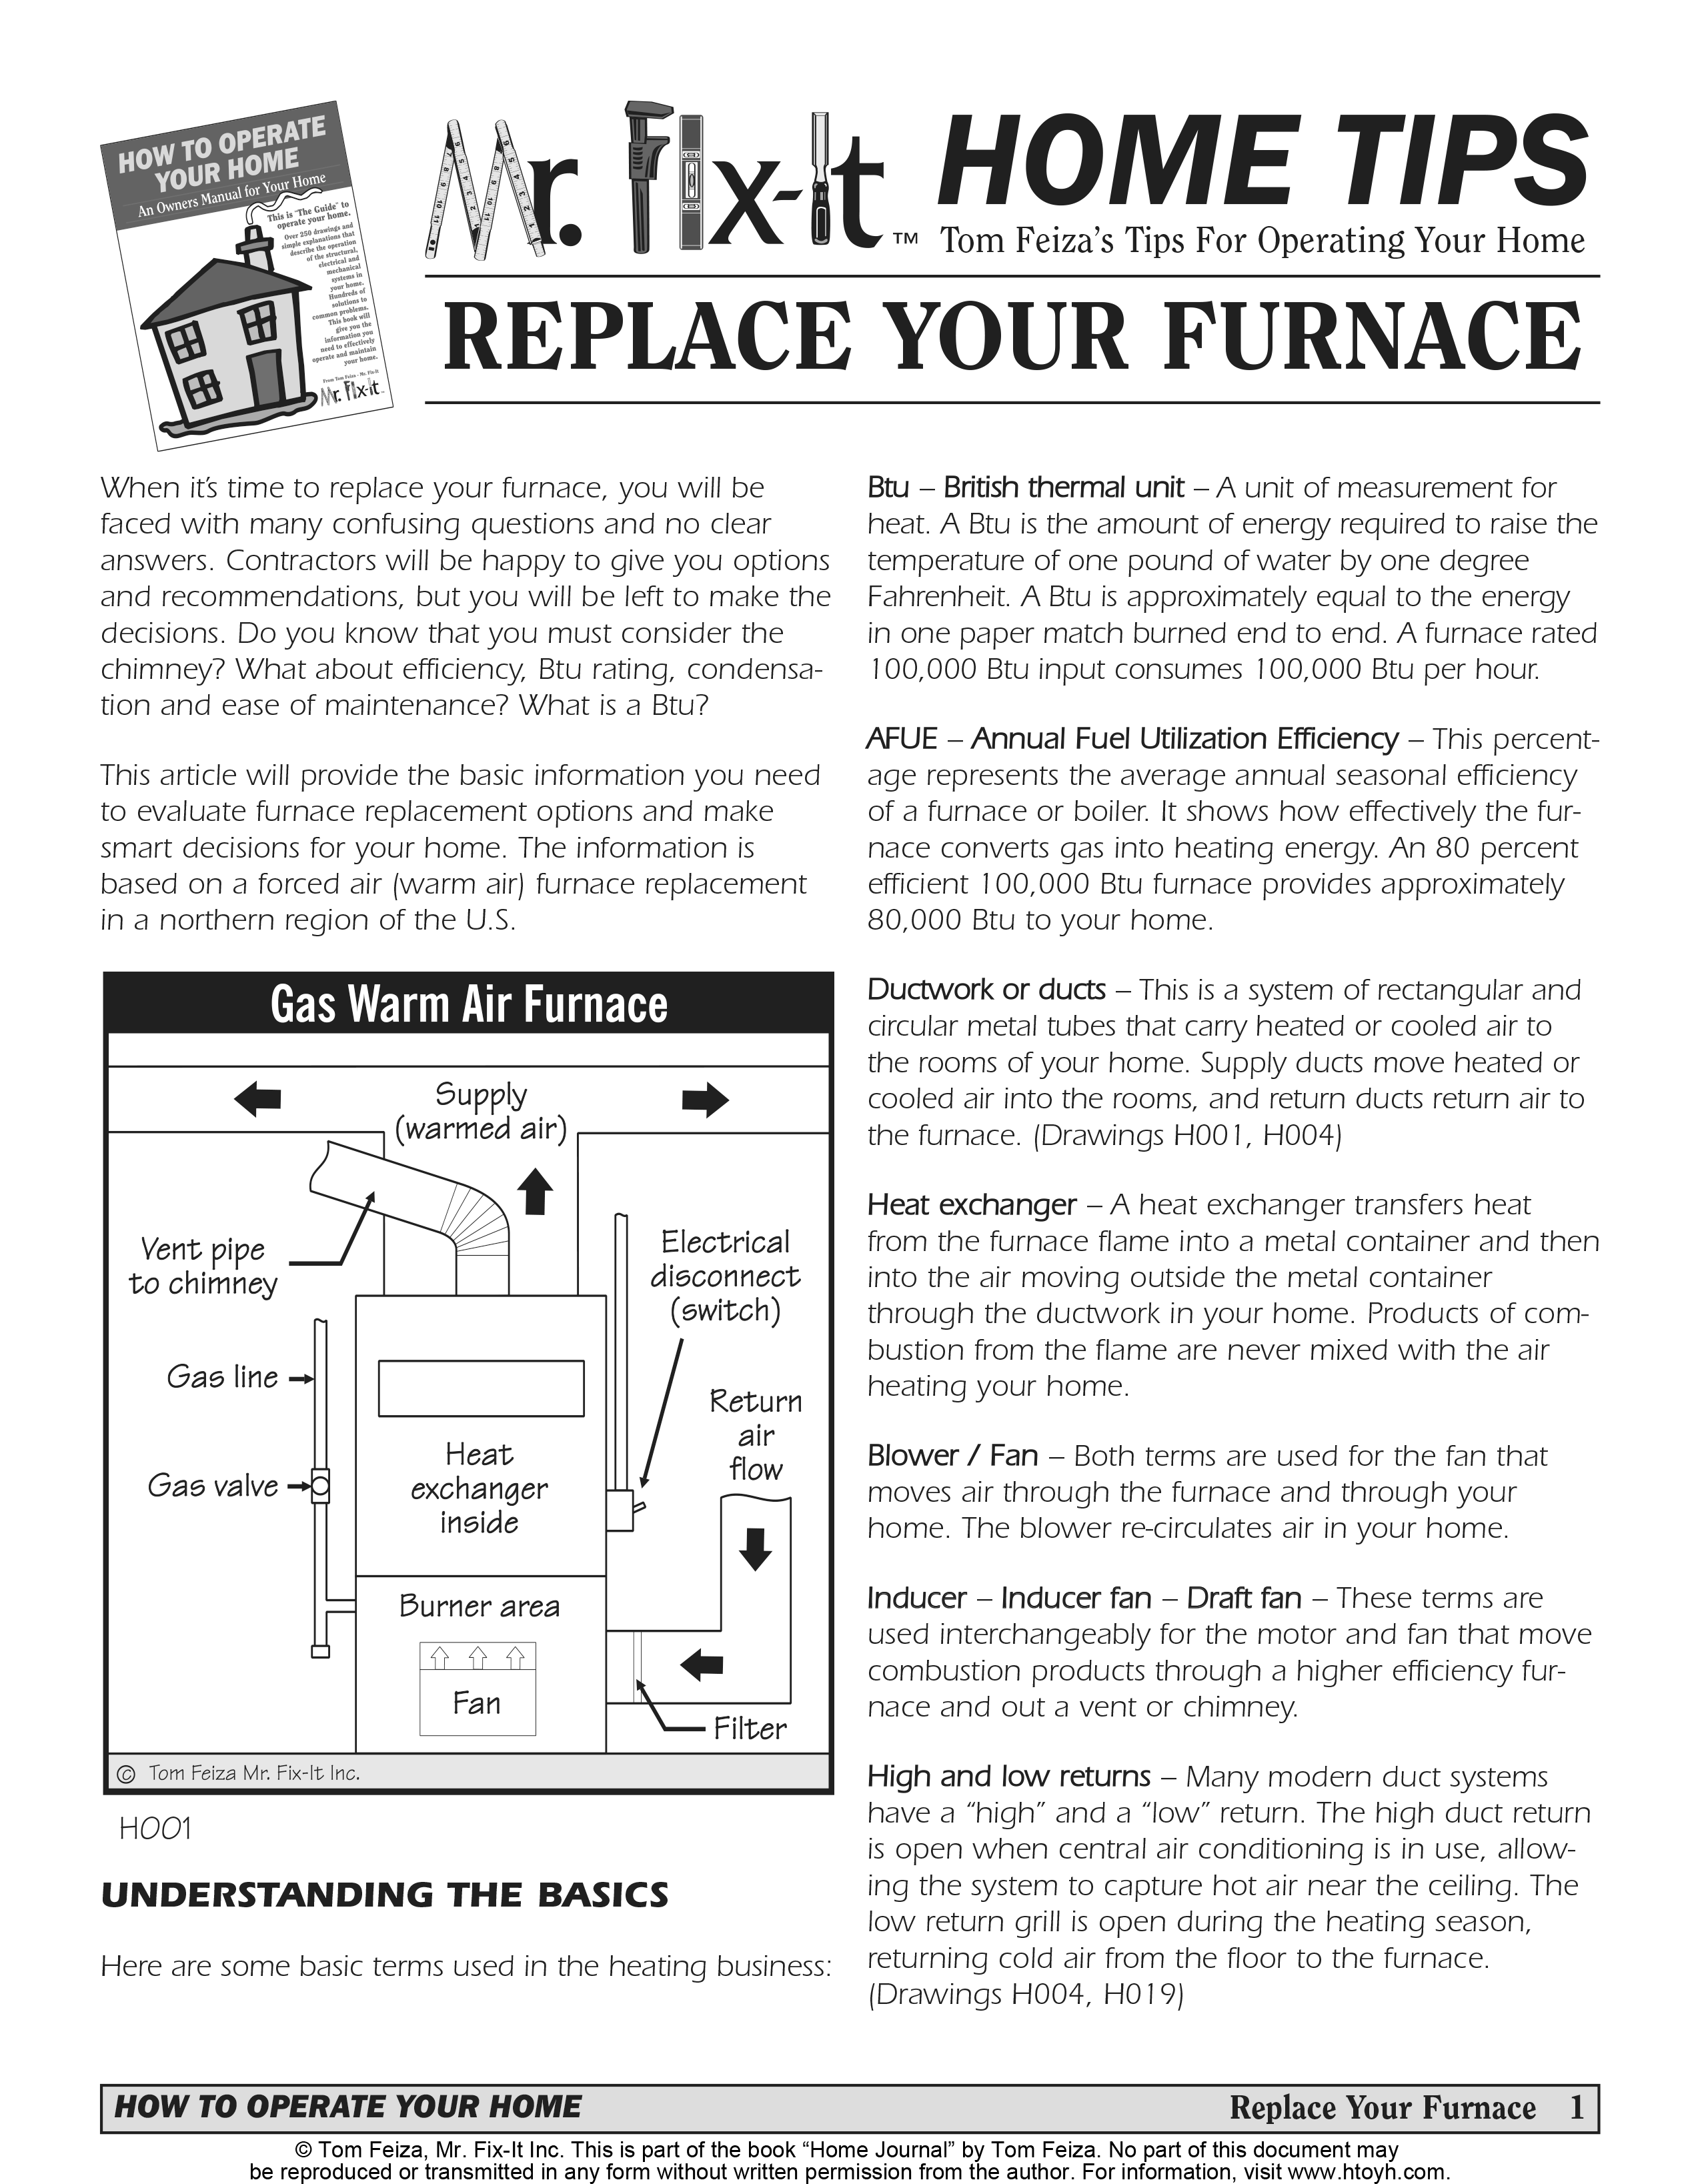 Replace Your Furnace PDF